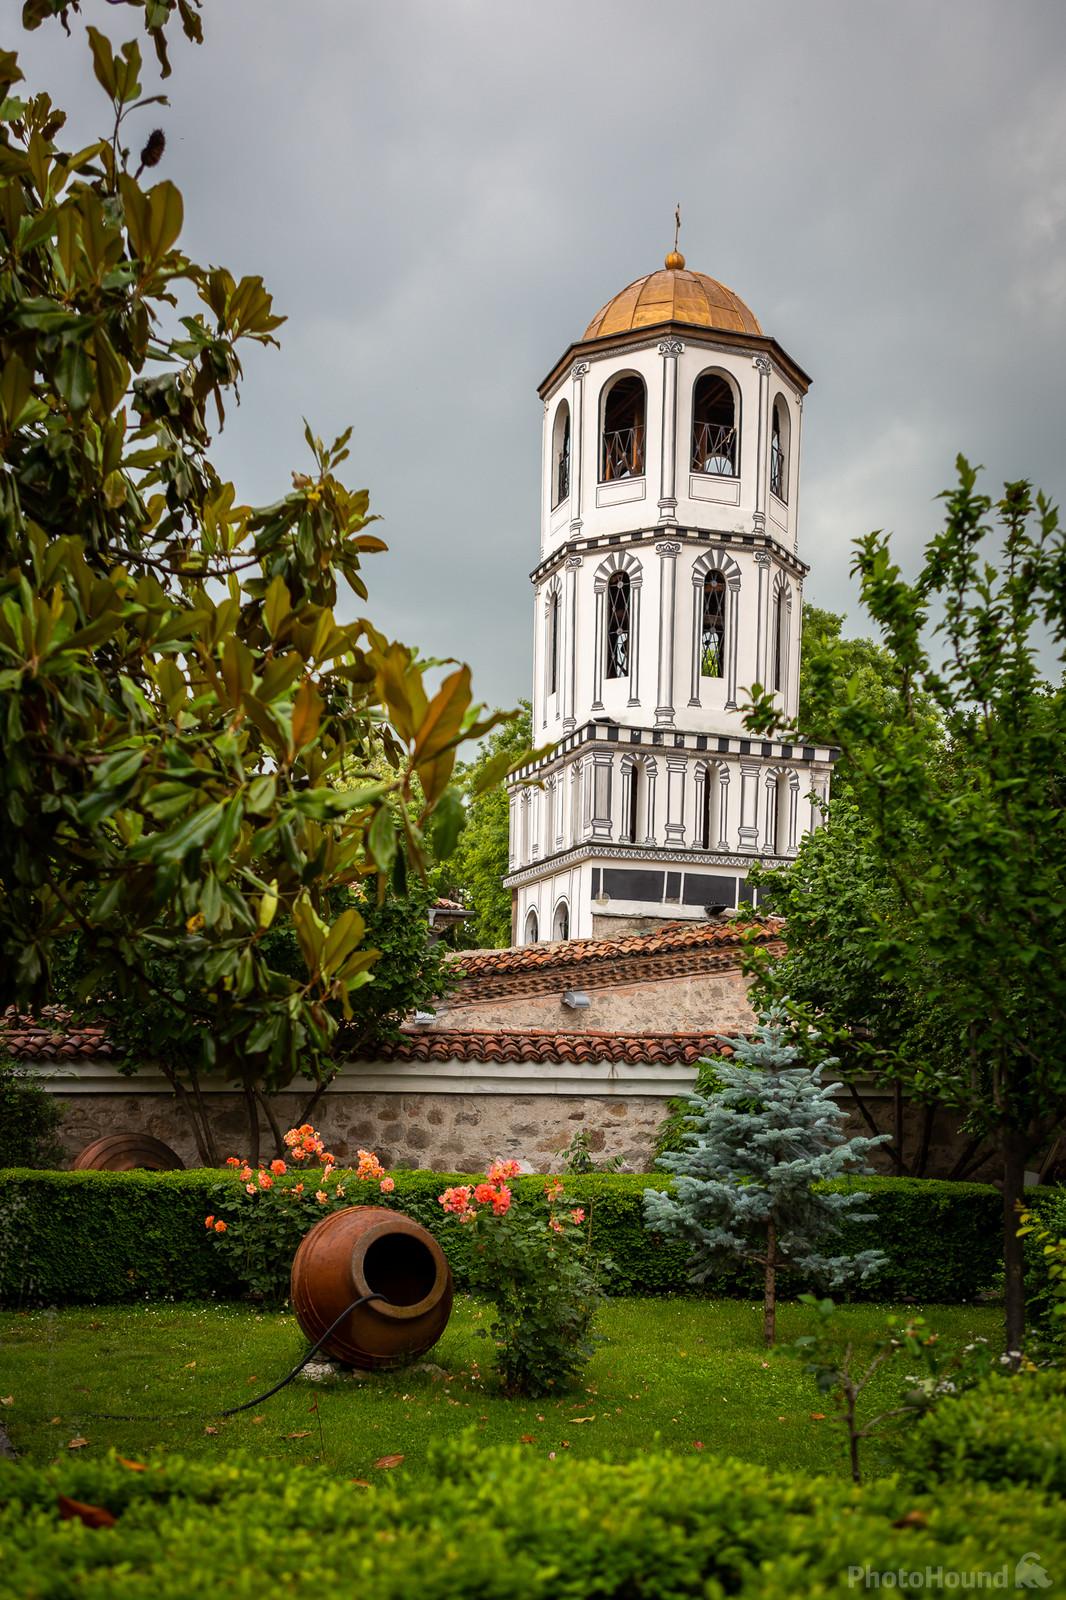 Image of Plovdiv old town by Dancho Hristov